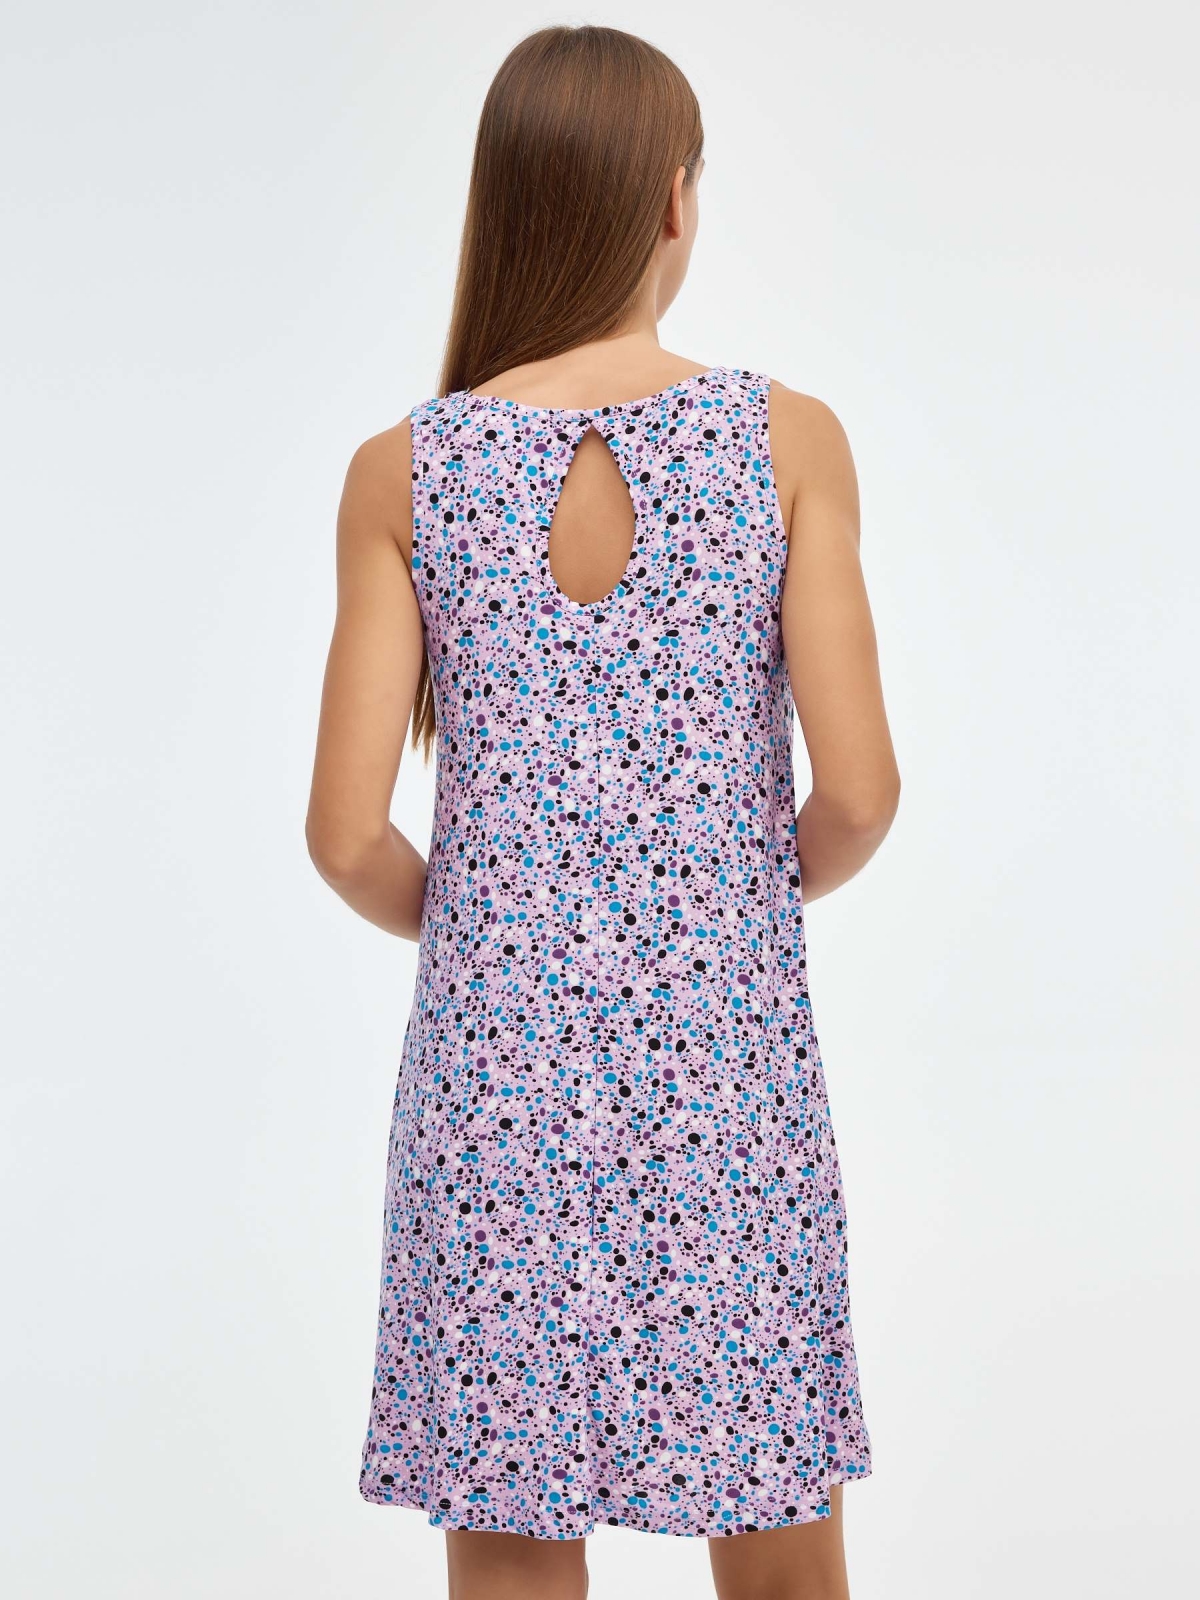 Printed dress lilac middle back view